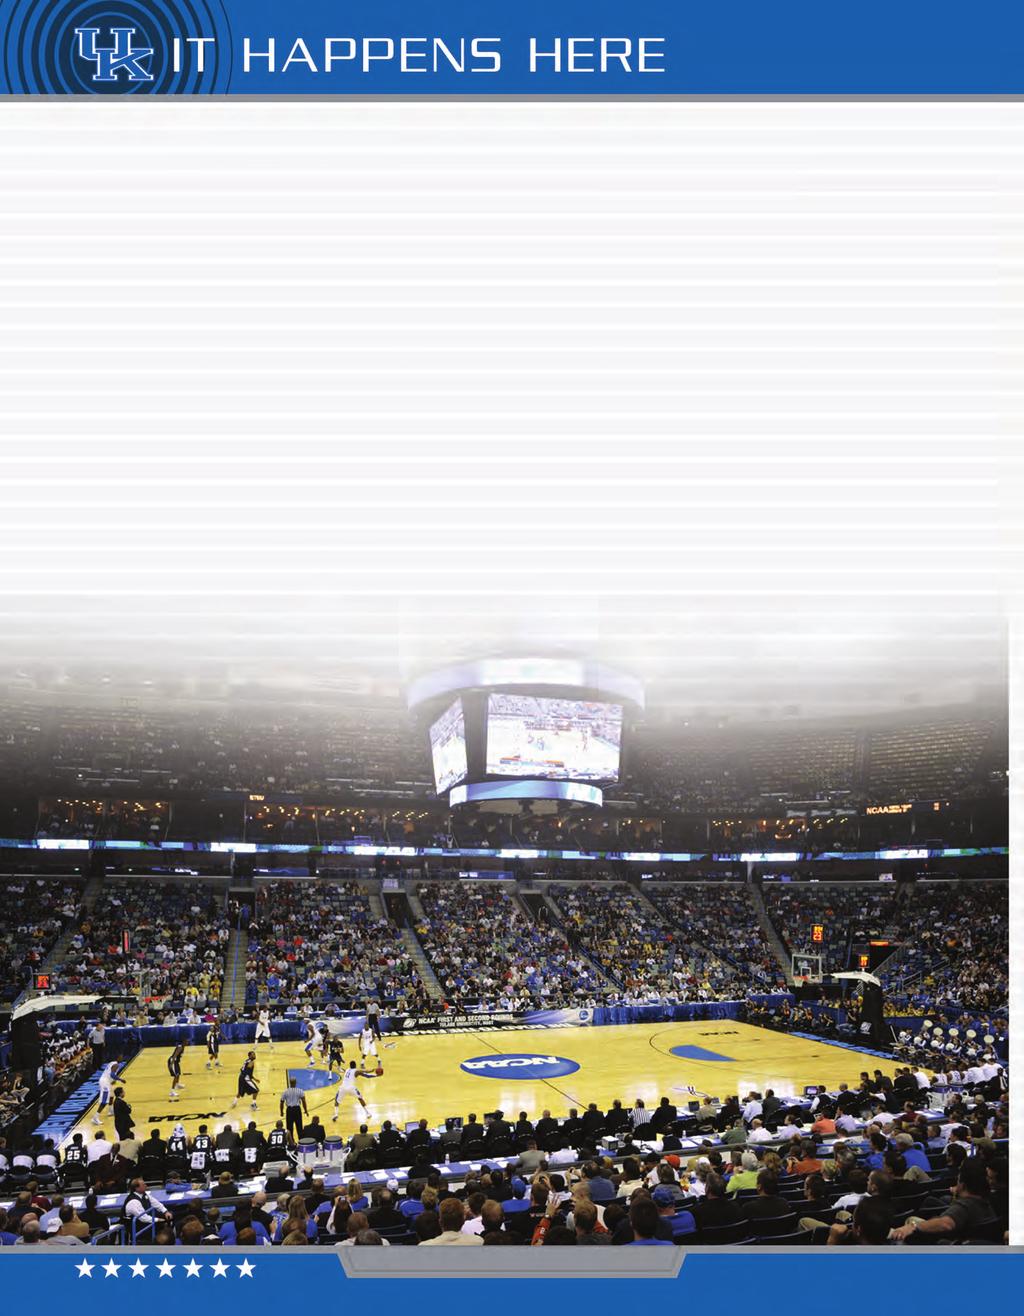 2010 NCAA TOURNAMENT OPENING ROUNDS Playing in a town nicknamed the Big Easy, Kentucky cruised by its first two NCAA Tournament